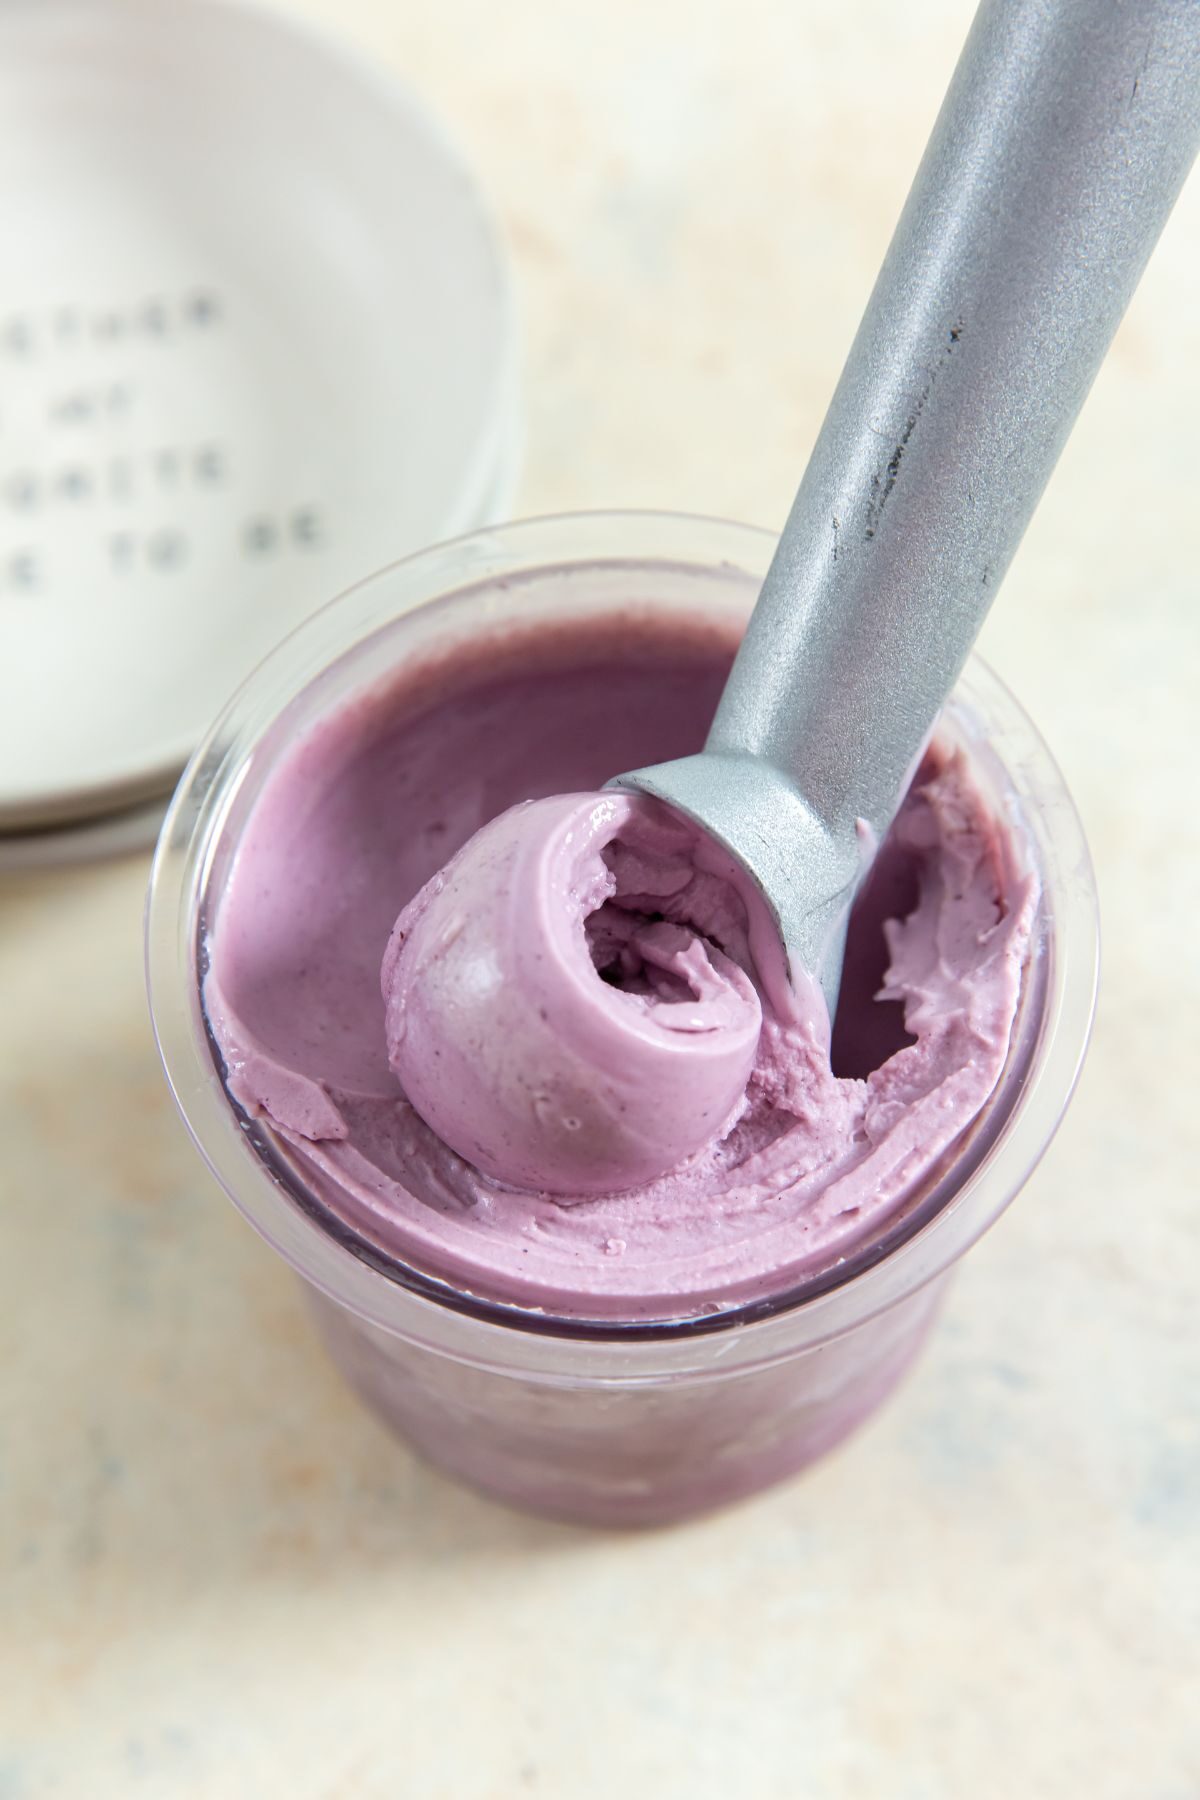 ninja creami low carb blueberry frozen yogurt in a pint with an ice cream scoop in it